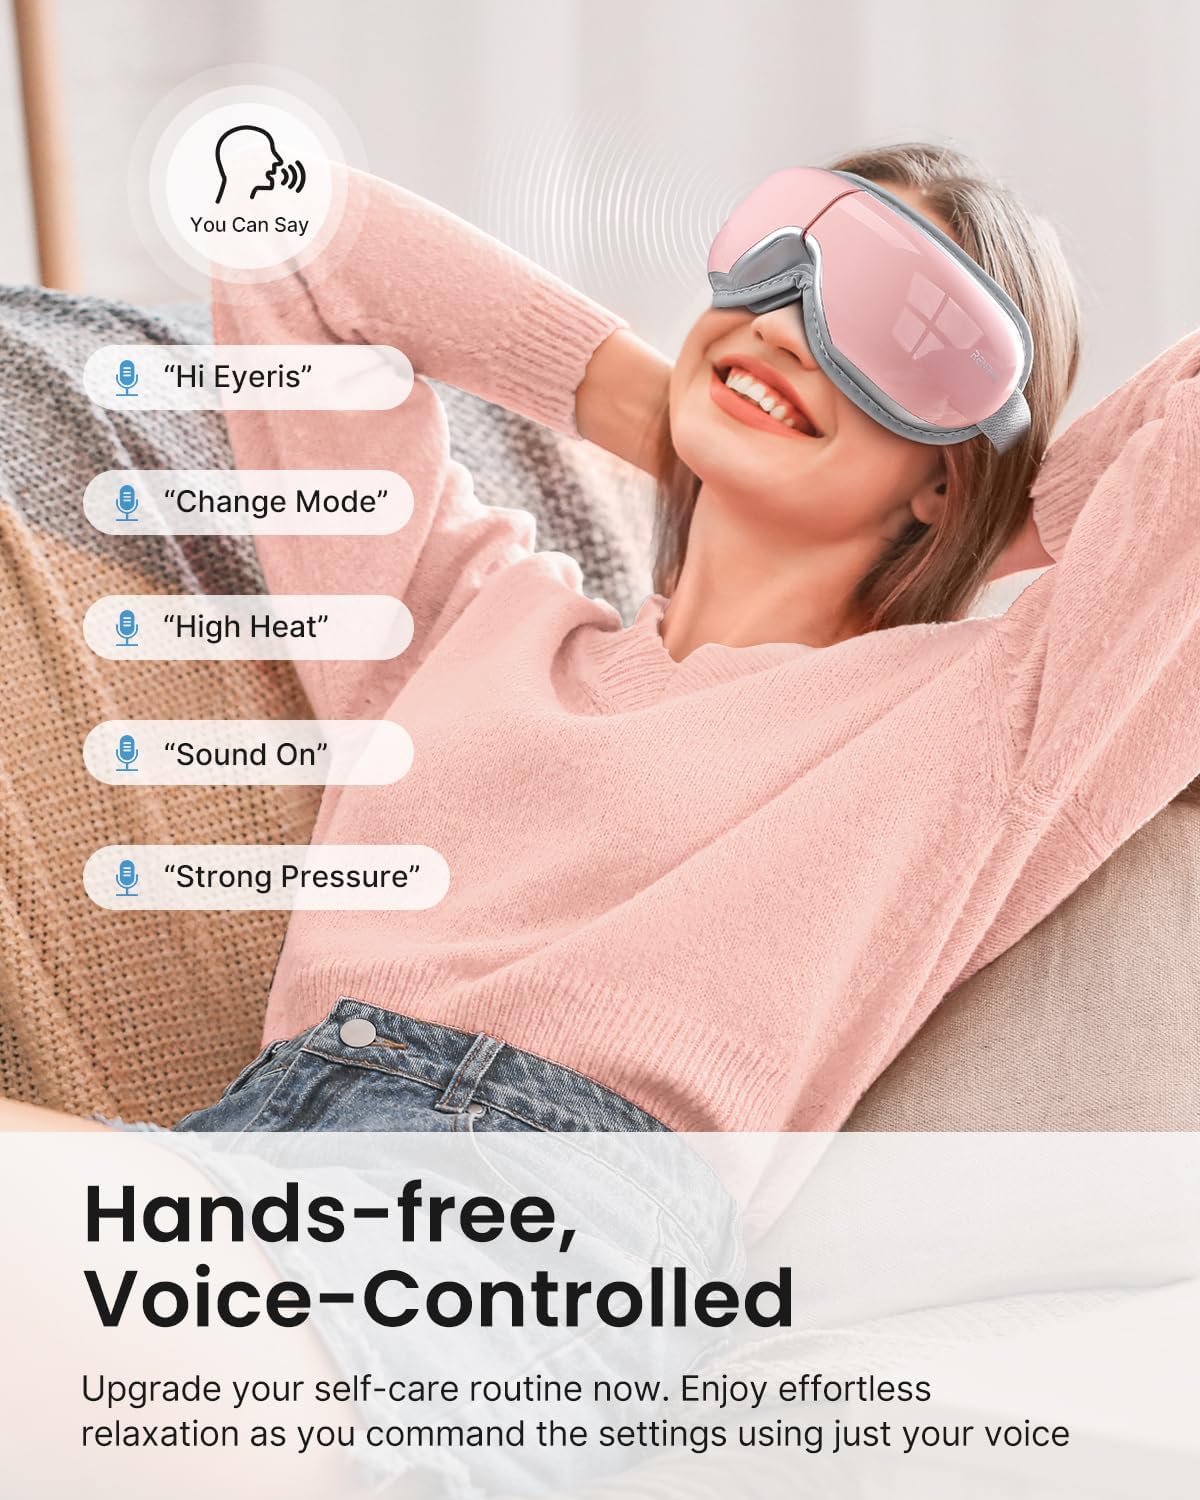 RENPHO Eyeris 1V - Voice Controlled Eye Massager for Migraines, Bluetooth Music Heated Eye Care Machine, Relax & Reduce Eye Strain Dark Circles Eye Bags, Face Massager, Gifts for Women\/Mom